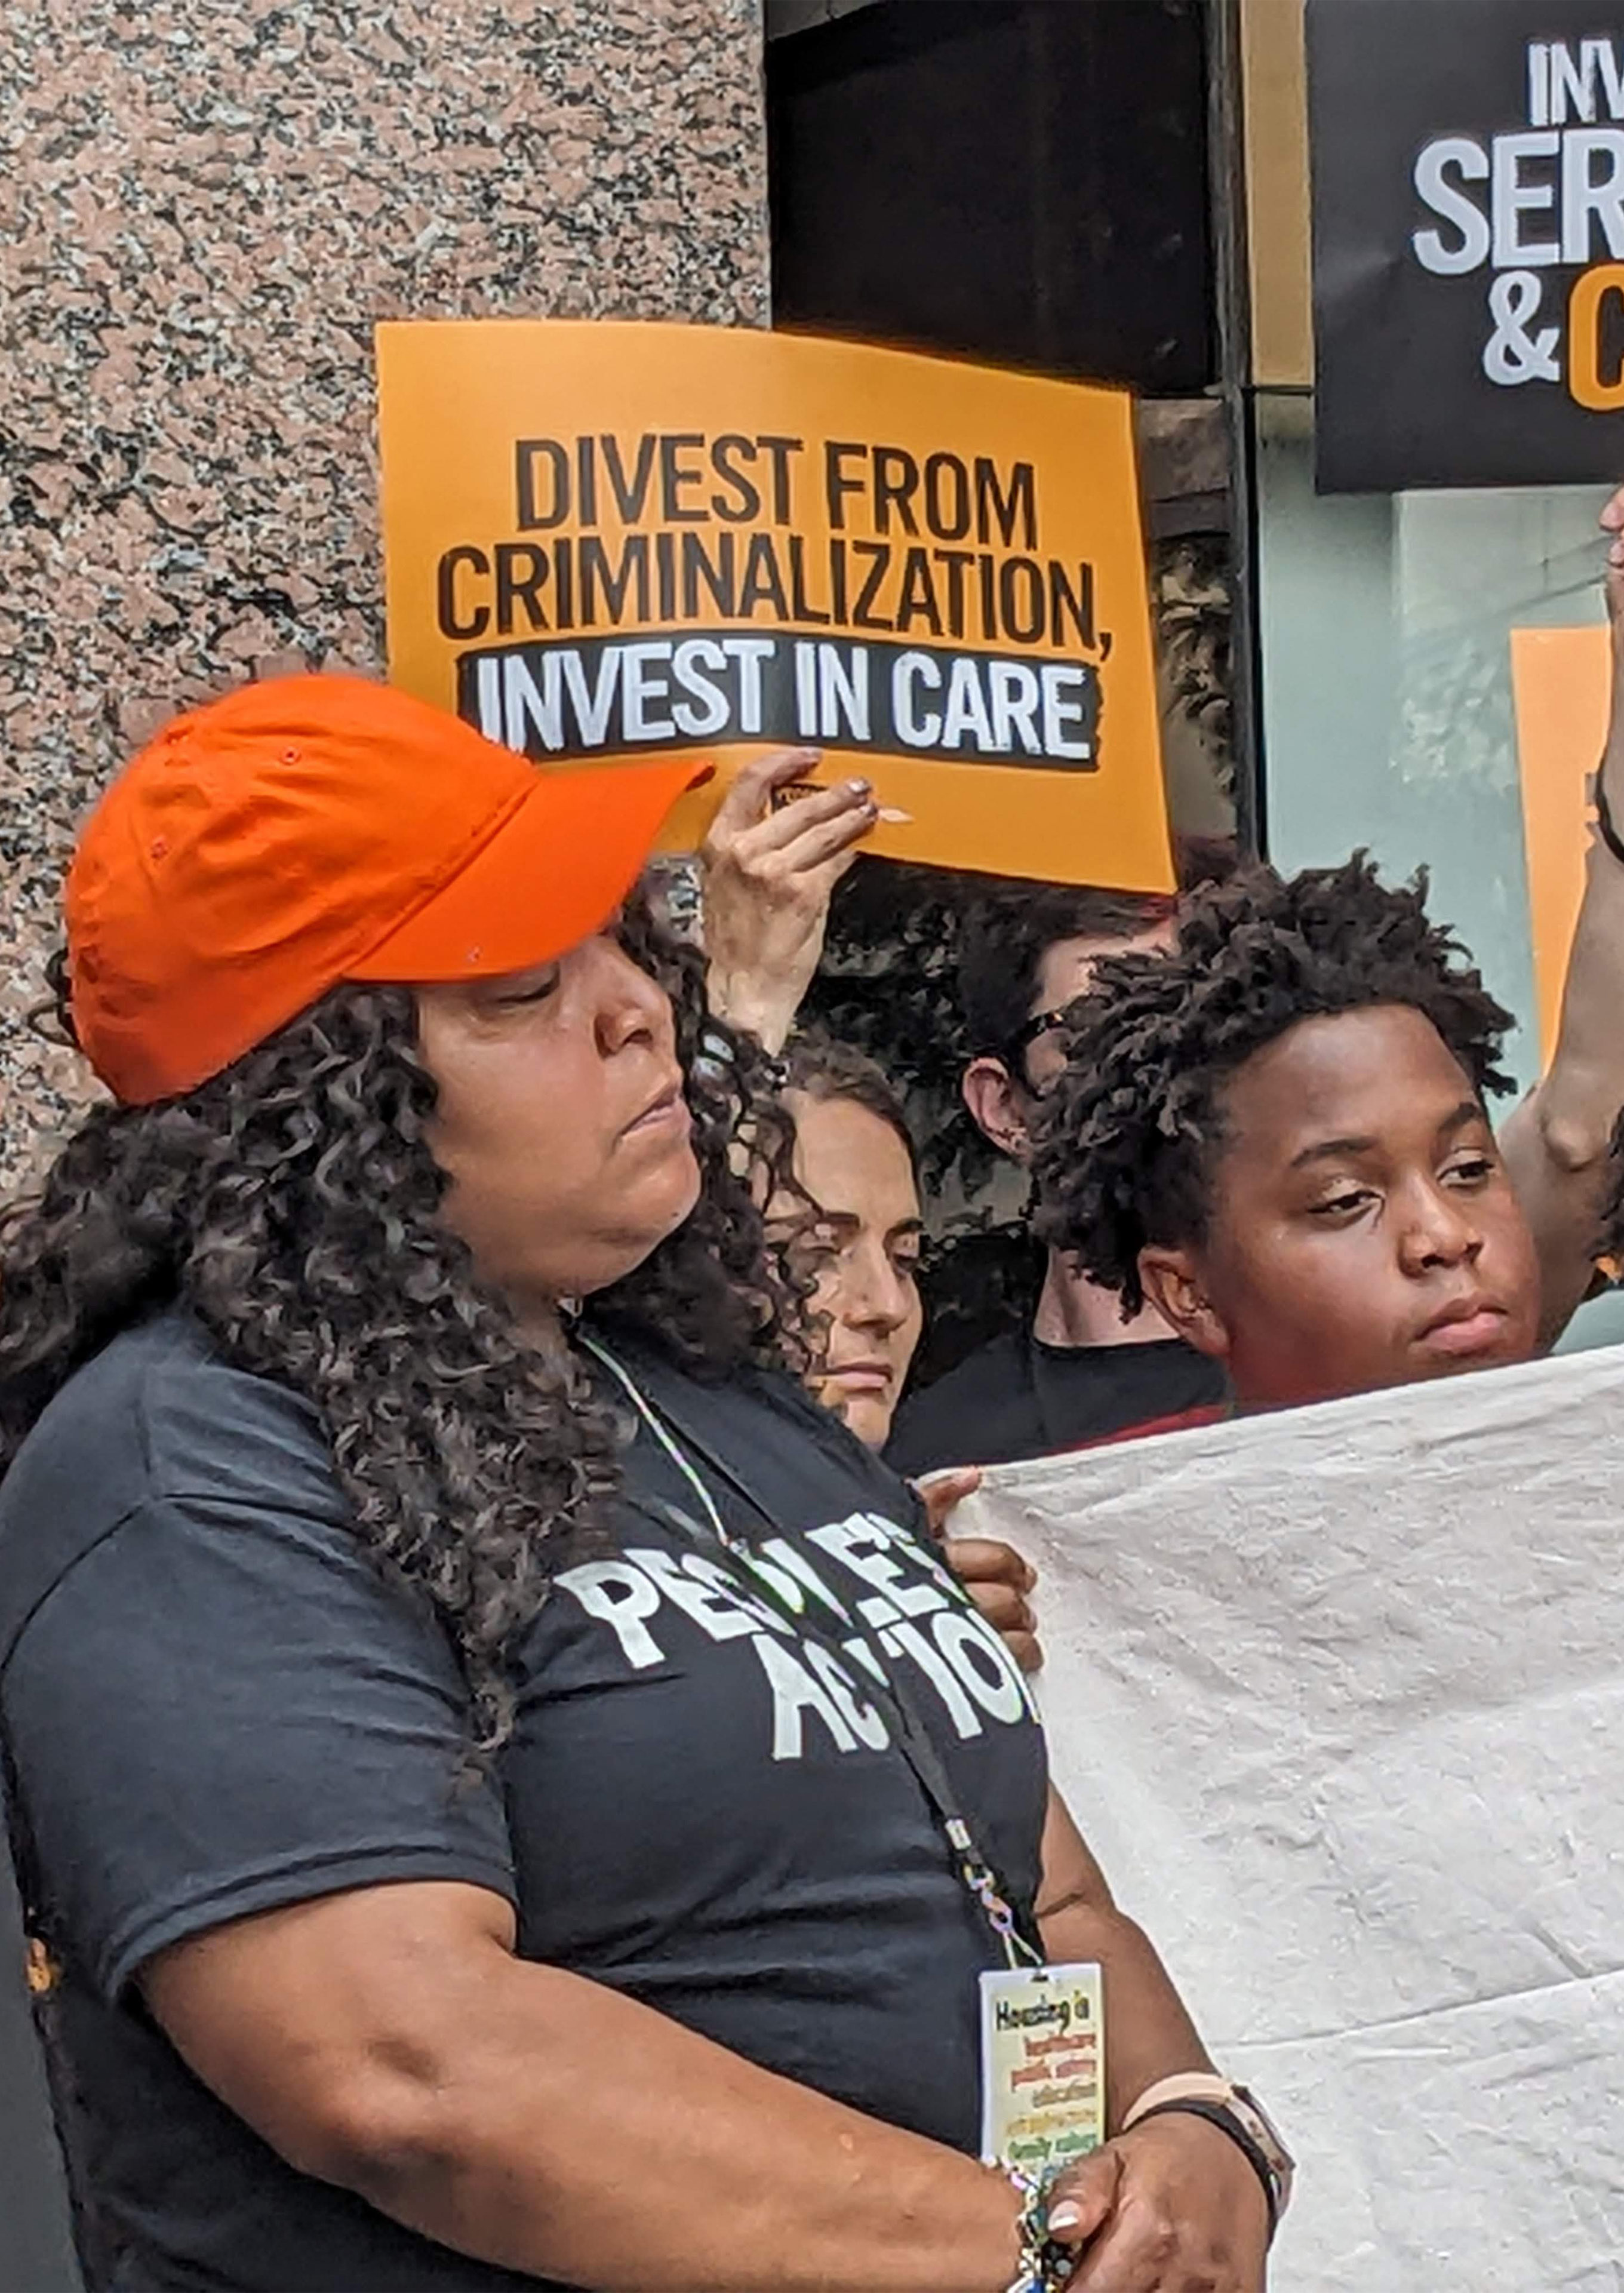 Shameka Parrish-Wright stands amongst others in front of the Drug Enforcement Administration Building. A person behind her is holding up a sign that reads, "DIVEST FROM CRIMINALIZATION, INVEST IN CARE."